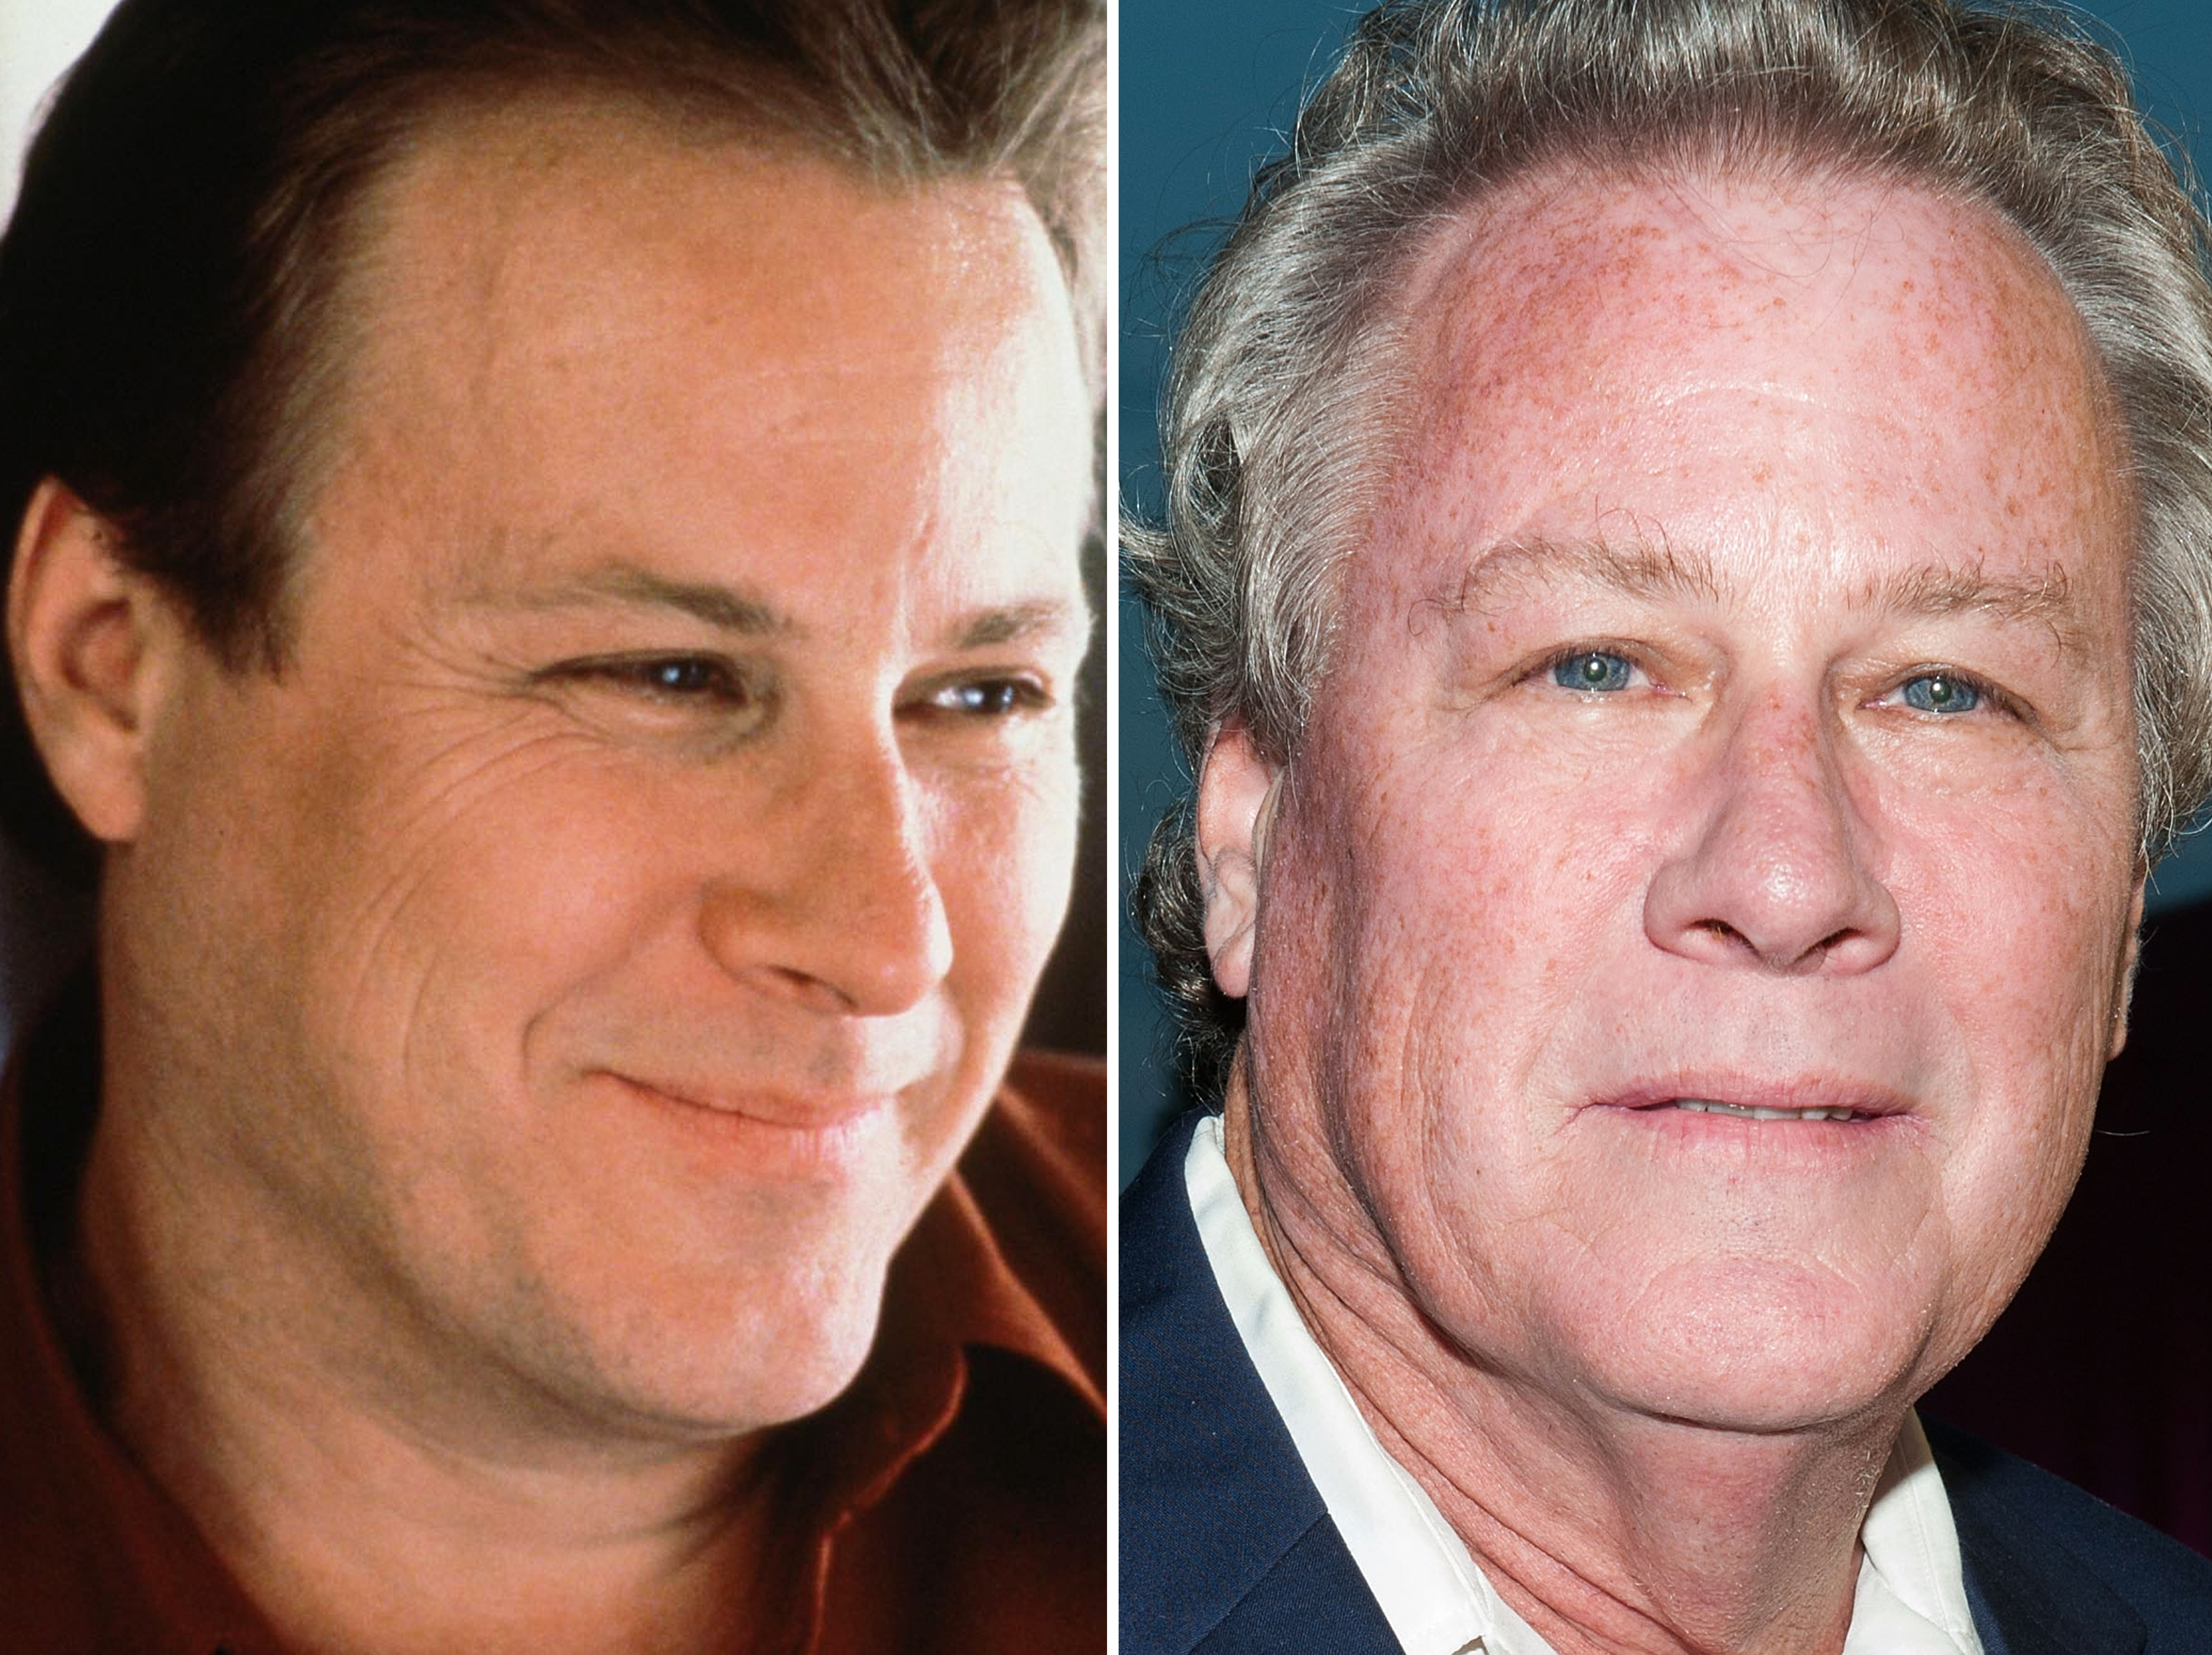 John Heard as Peter McCallister in "Home Alone," 1990 | John Heard at the screening of "Big" in Hollywood, California on July 20, 2013 | Sources: Facebook/Home Alone | Getty Images